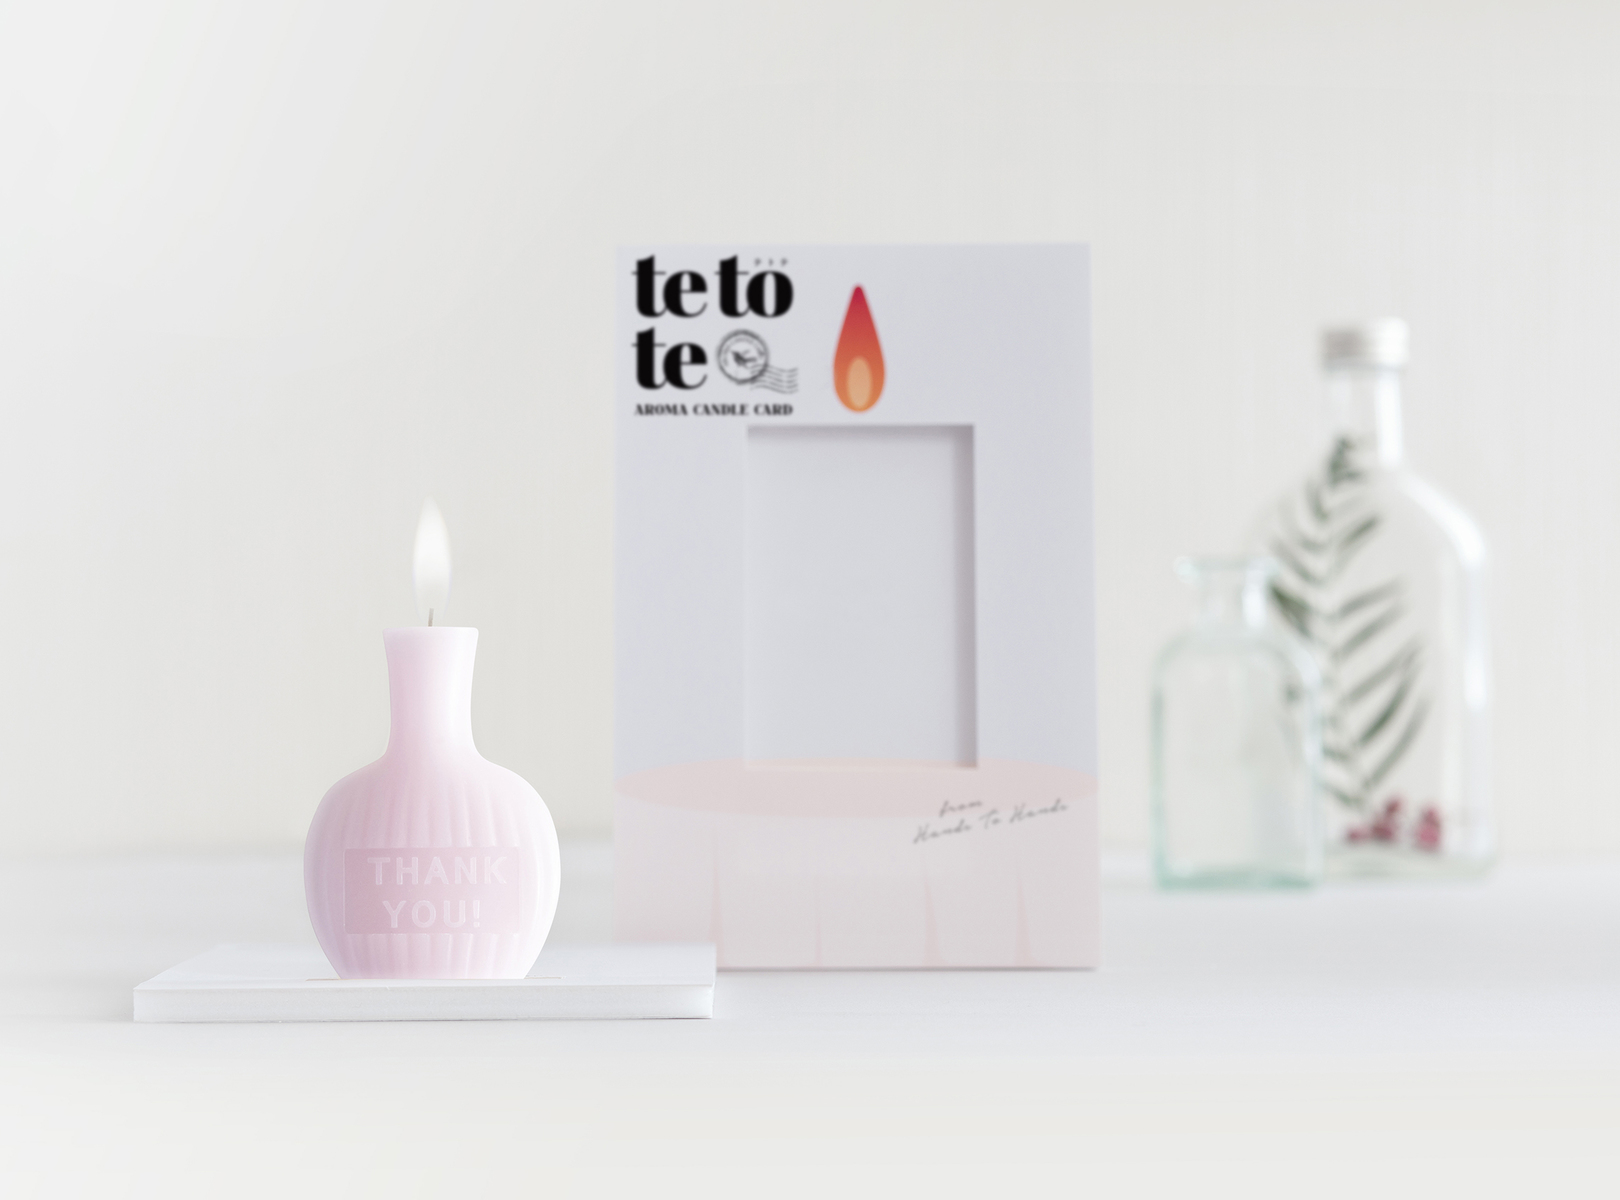 “tetote” is an unique message card with an aroma scented candle